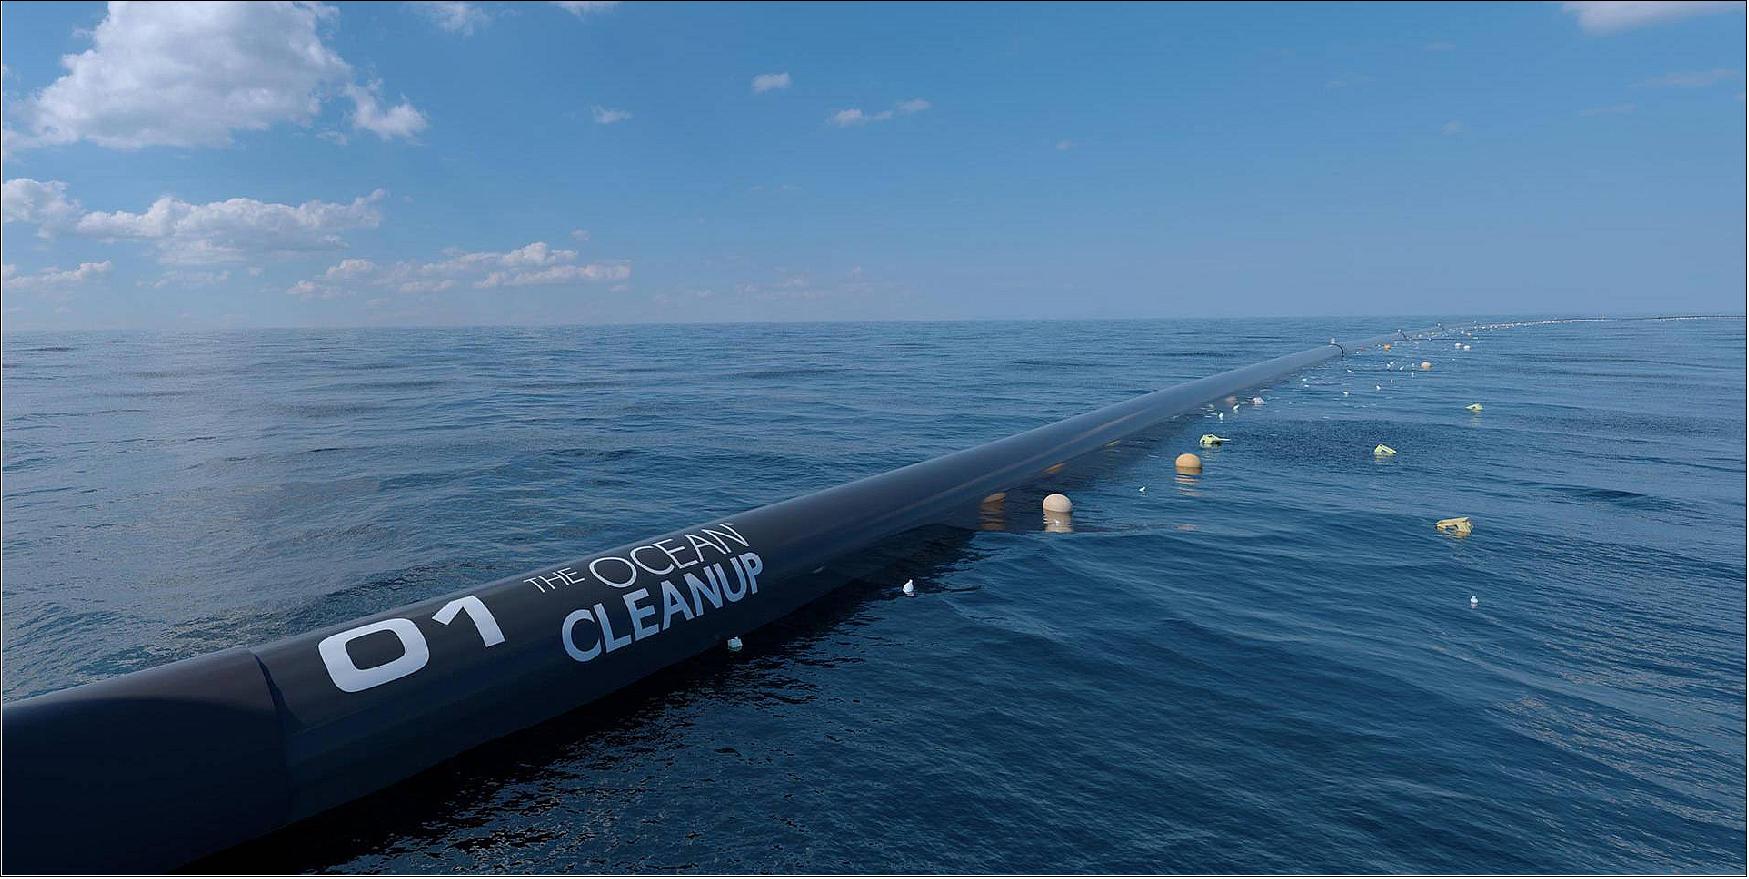 Figure 13: The Ocean Cleanup is developing a passive system, using the natural oceanic forces to catch and concentrate the plastic. Both the plastic and system are being carried by the current. However, wind and waves propel only the system, as the floater sits just above the water surface, while the plastic is primarily just beneath it. The system thus moves faster than the plastic, allowing the plastic to be captured (image credit: Ocean Cleanup)